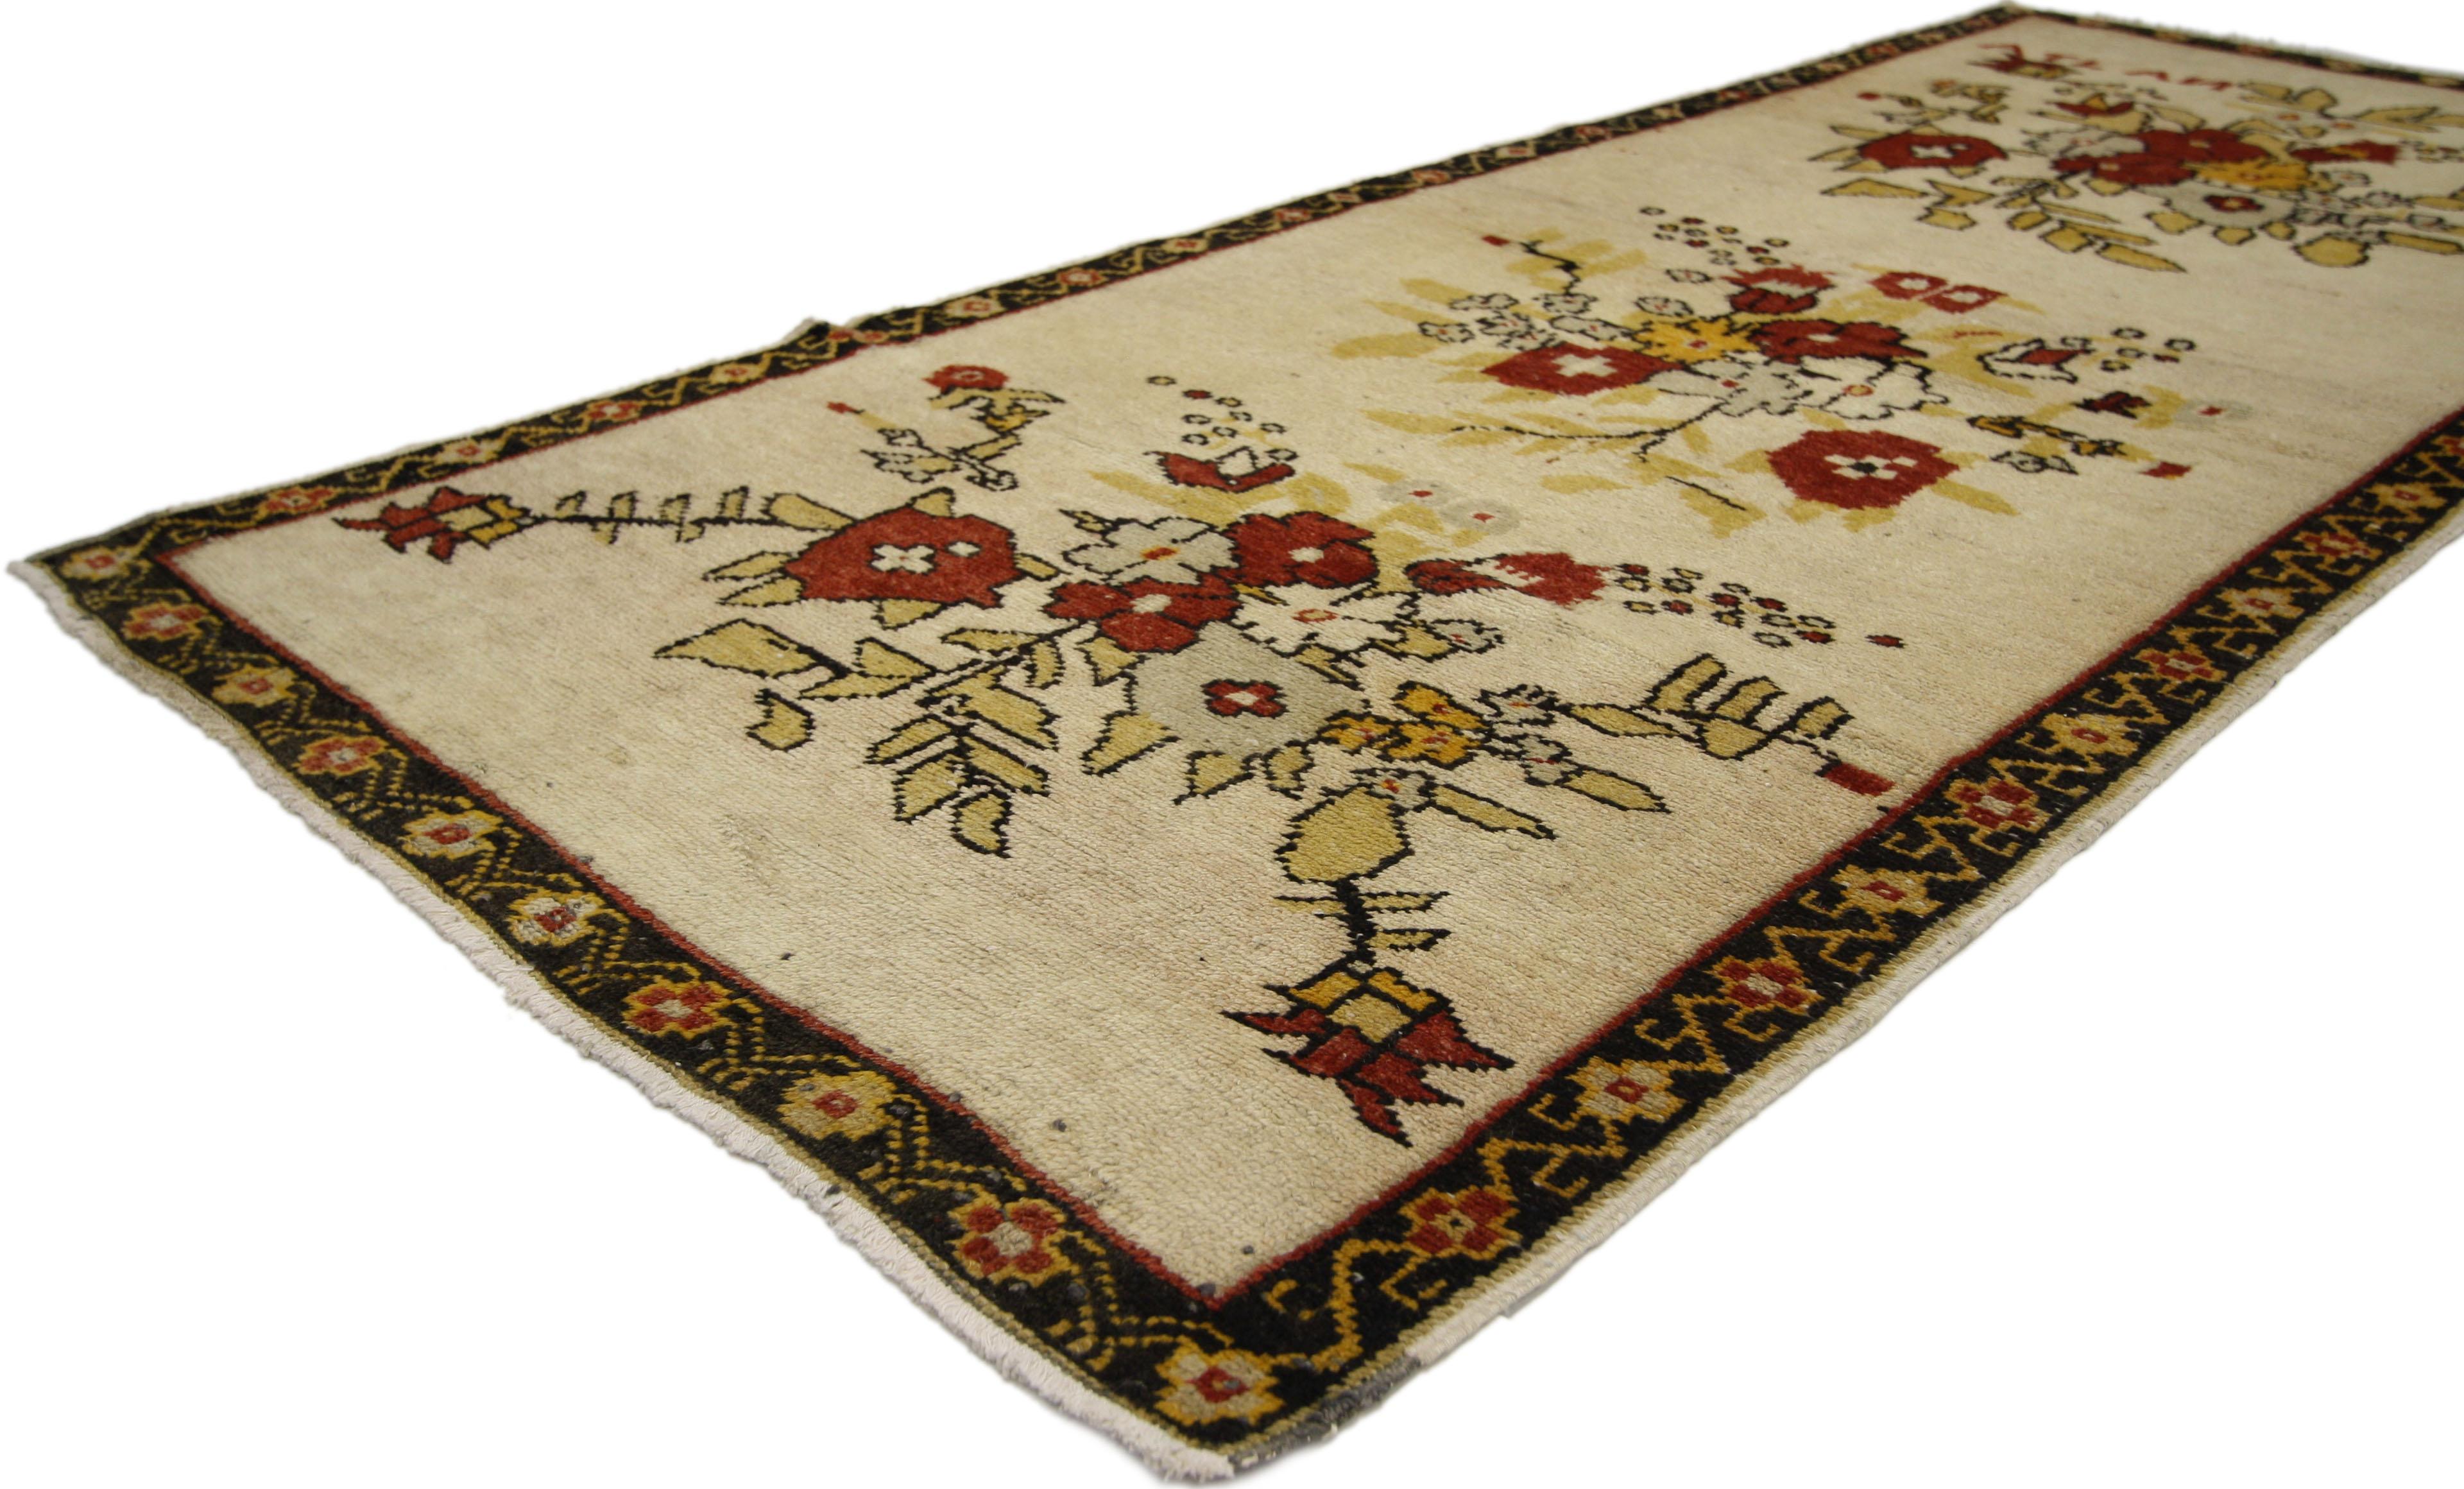 50175 Vintage Turkish Oushak Accent Rug with English Country Style, Small Hallway Runner This hand-knotted wool vintage Oushak accent rug features three large-scale stylized flower bouquets rendered in variegated shades of red, saffron, light gray